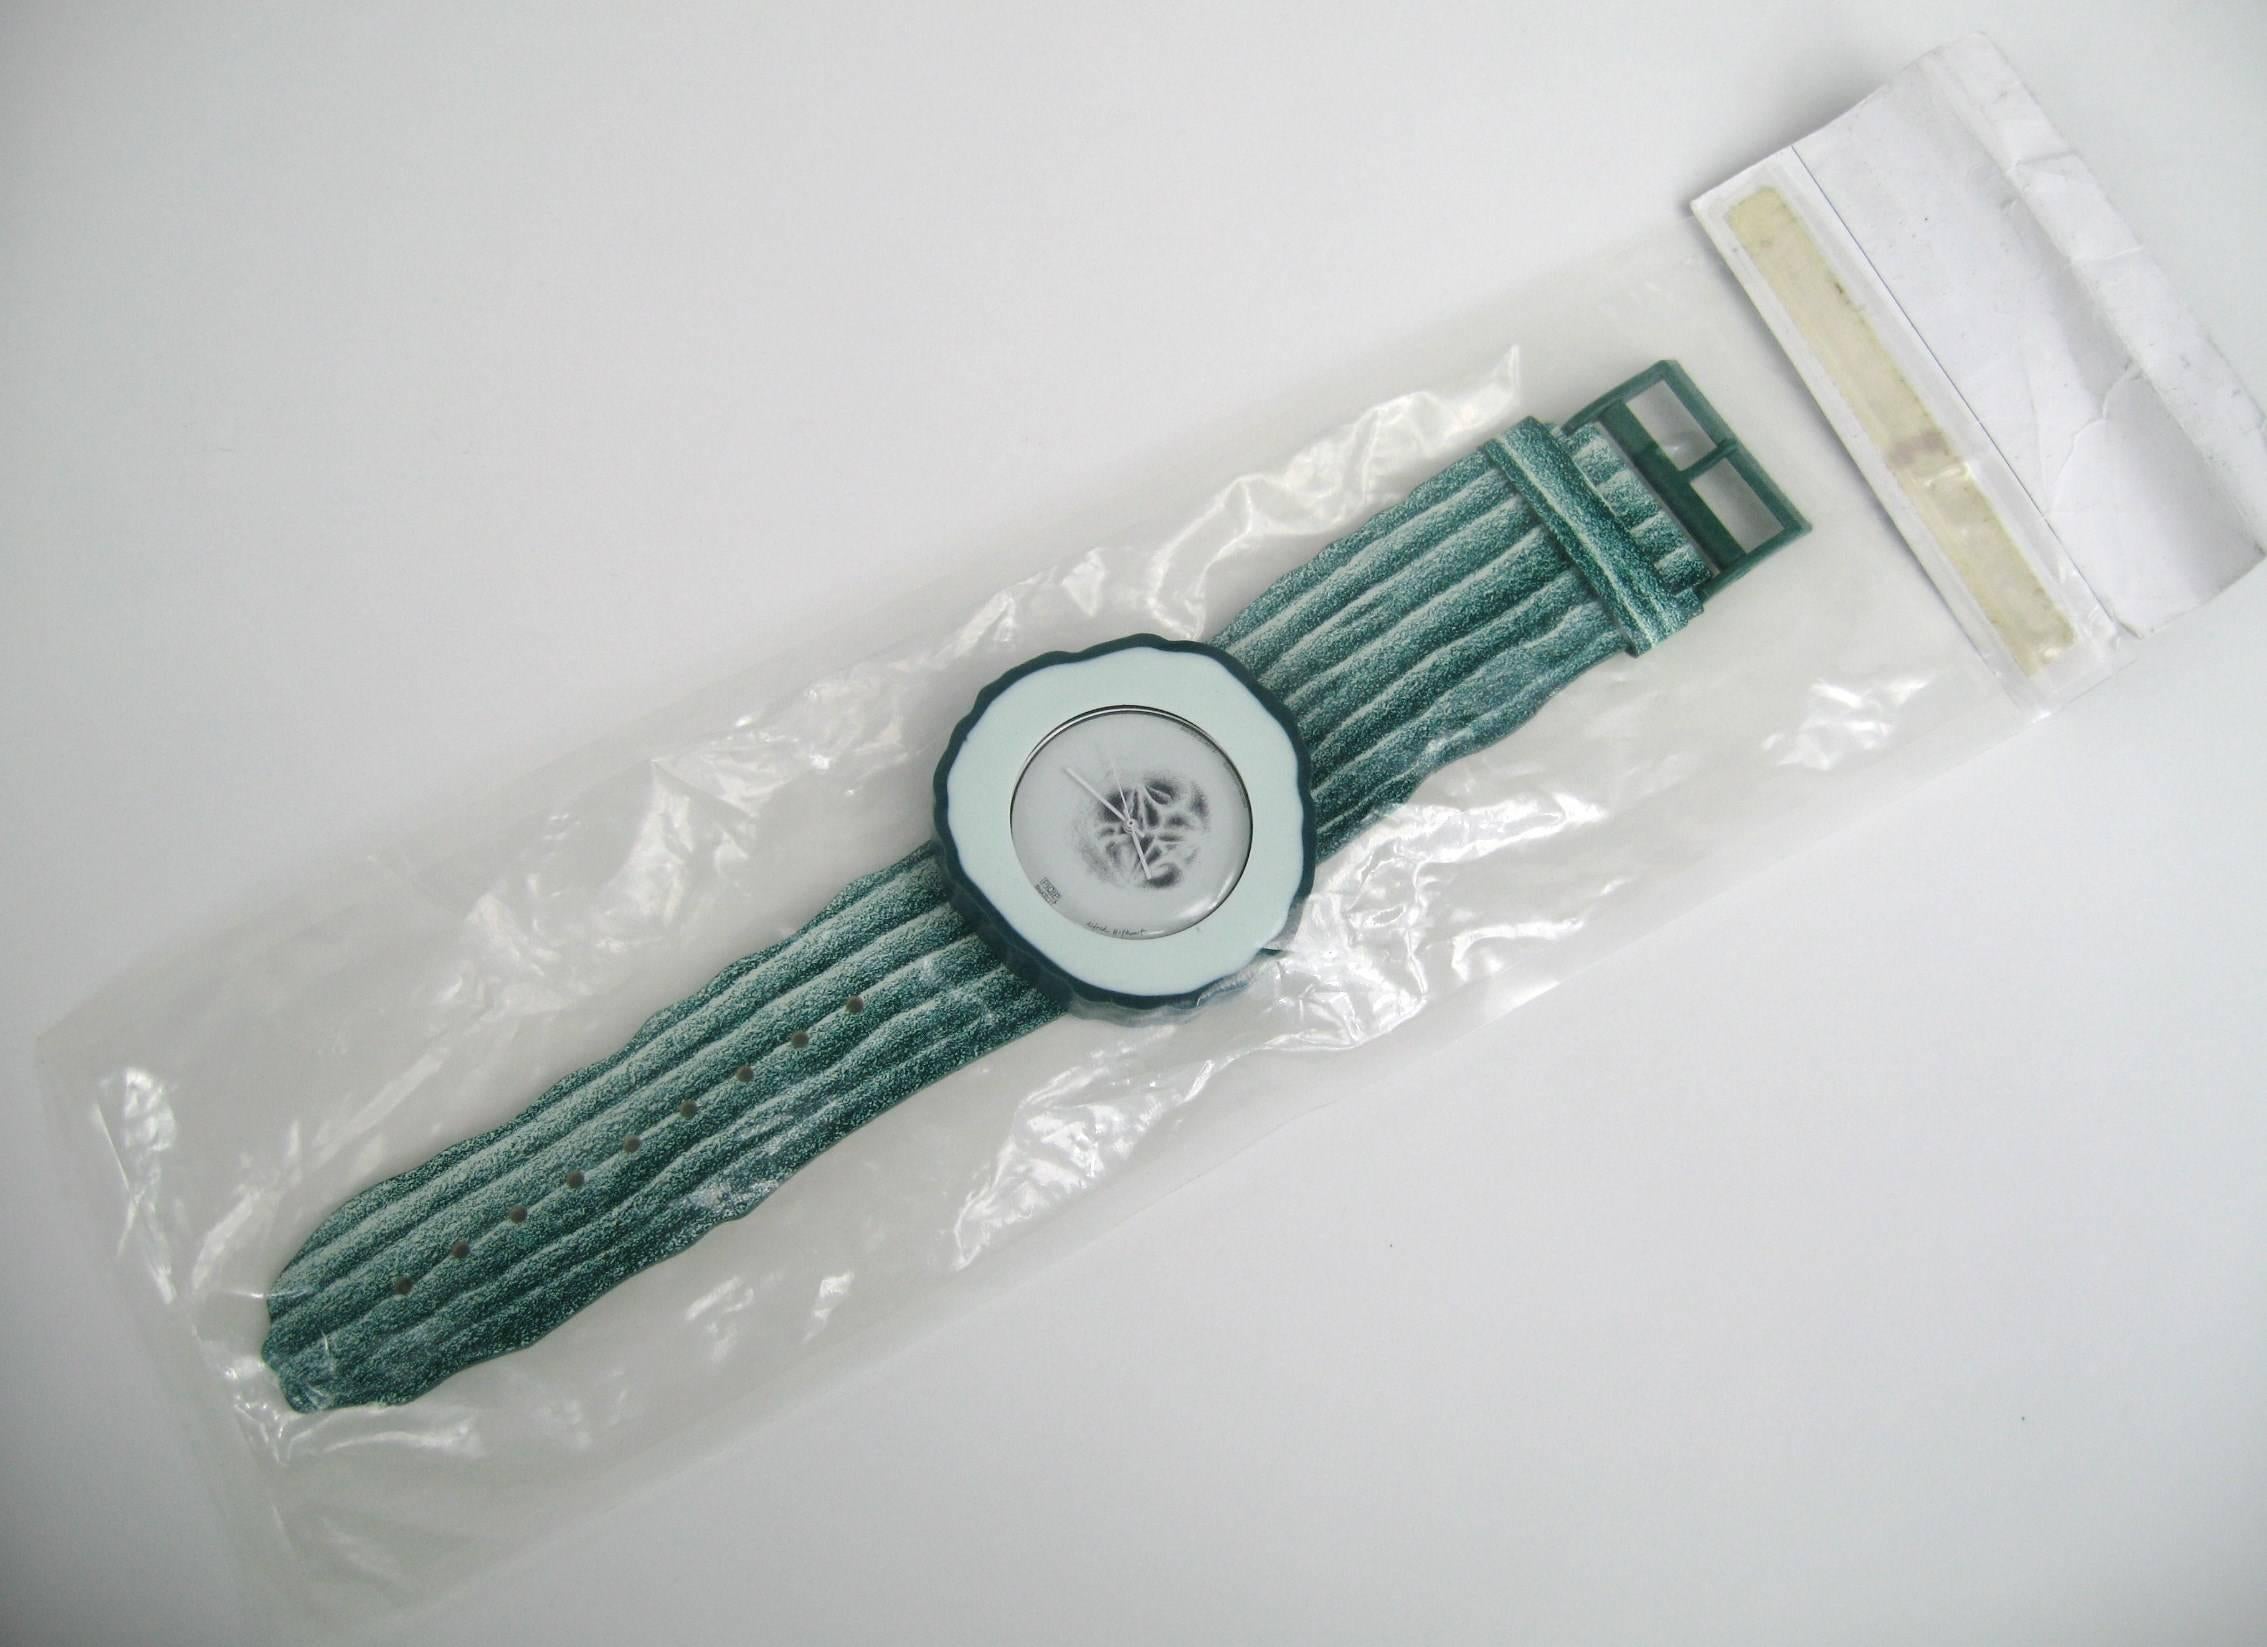 1991 Guhrke Artist Series Swatch watch #334/9999. Never worn or taken out of the package. Gu(h)rke (PWZ100) is a cool green, right down to the dial, inked to look like a moist, seeded slice of cucumber. The Watch is still in the original Vacuum